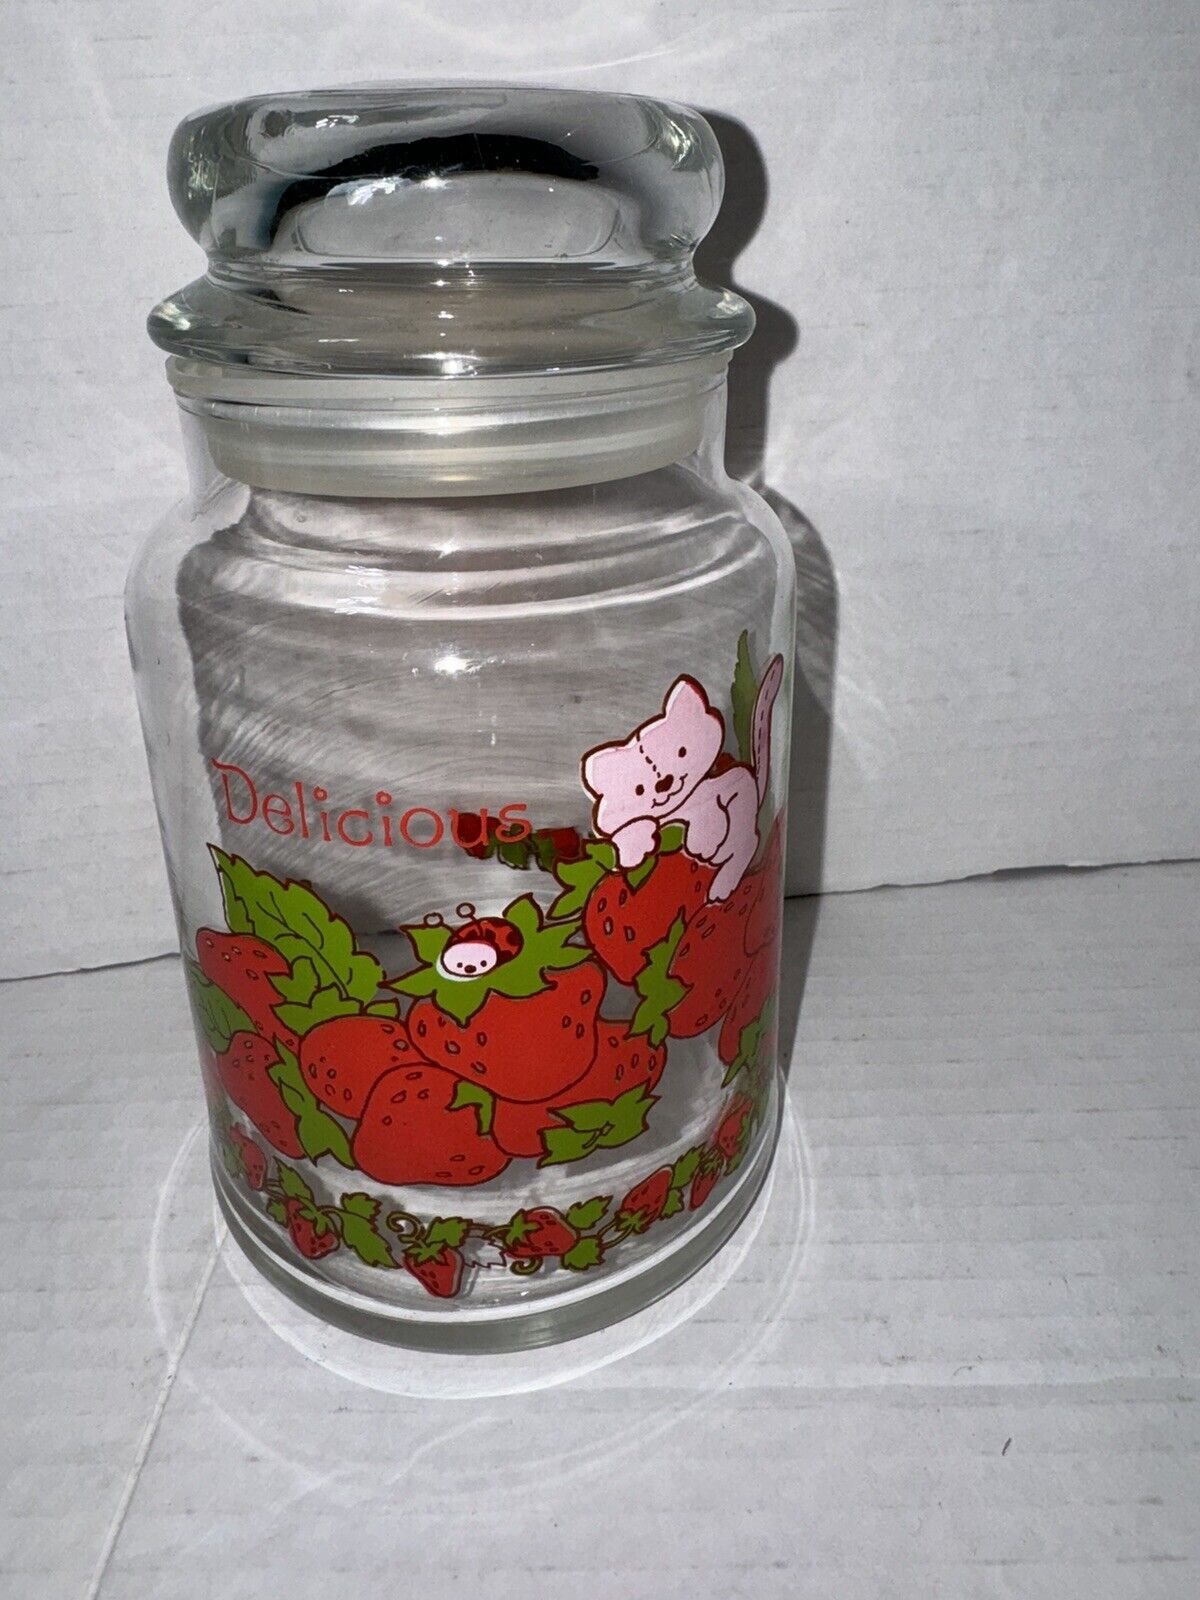 Strawberry Shortcake American Greetings Glass Jar Container W/ Stopper Lid  1980